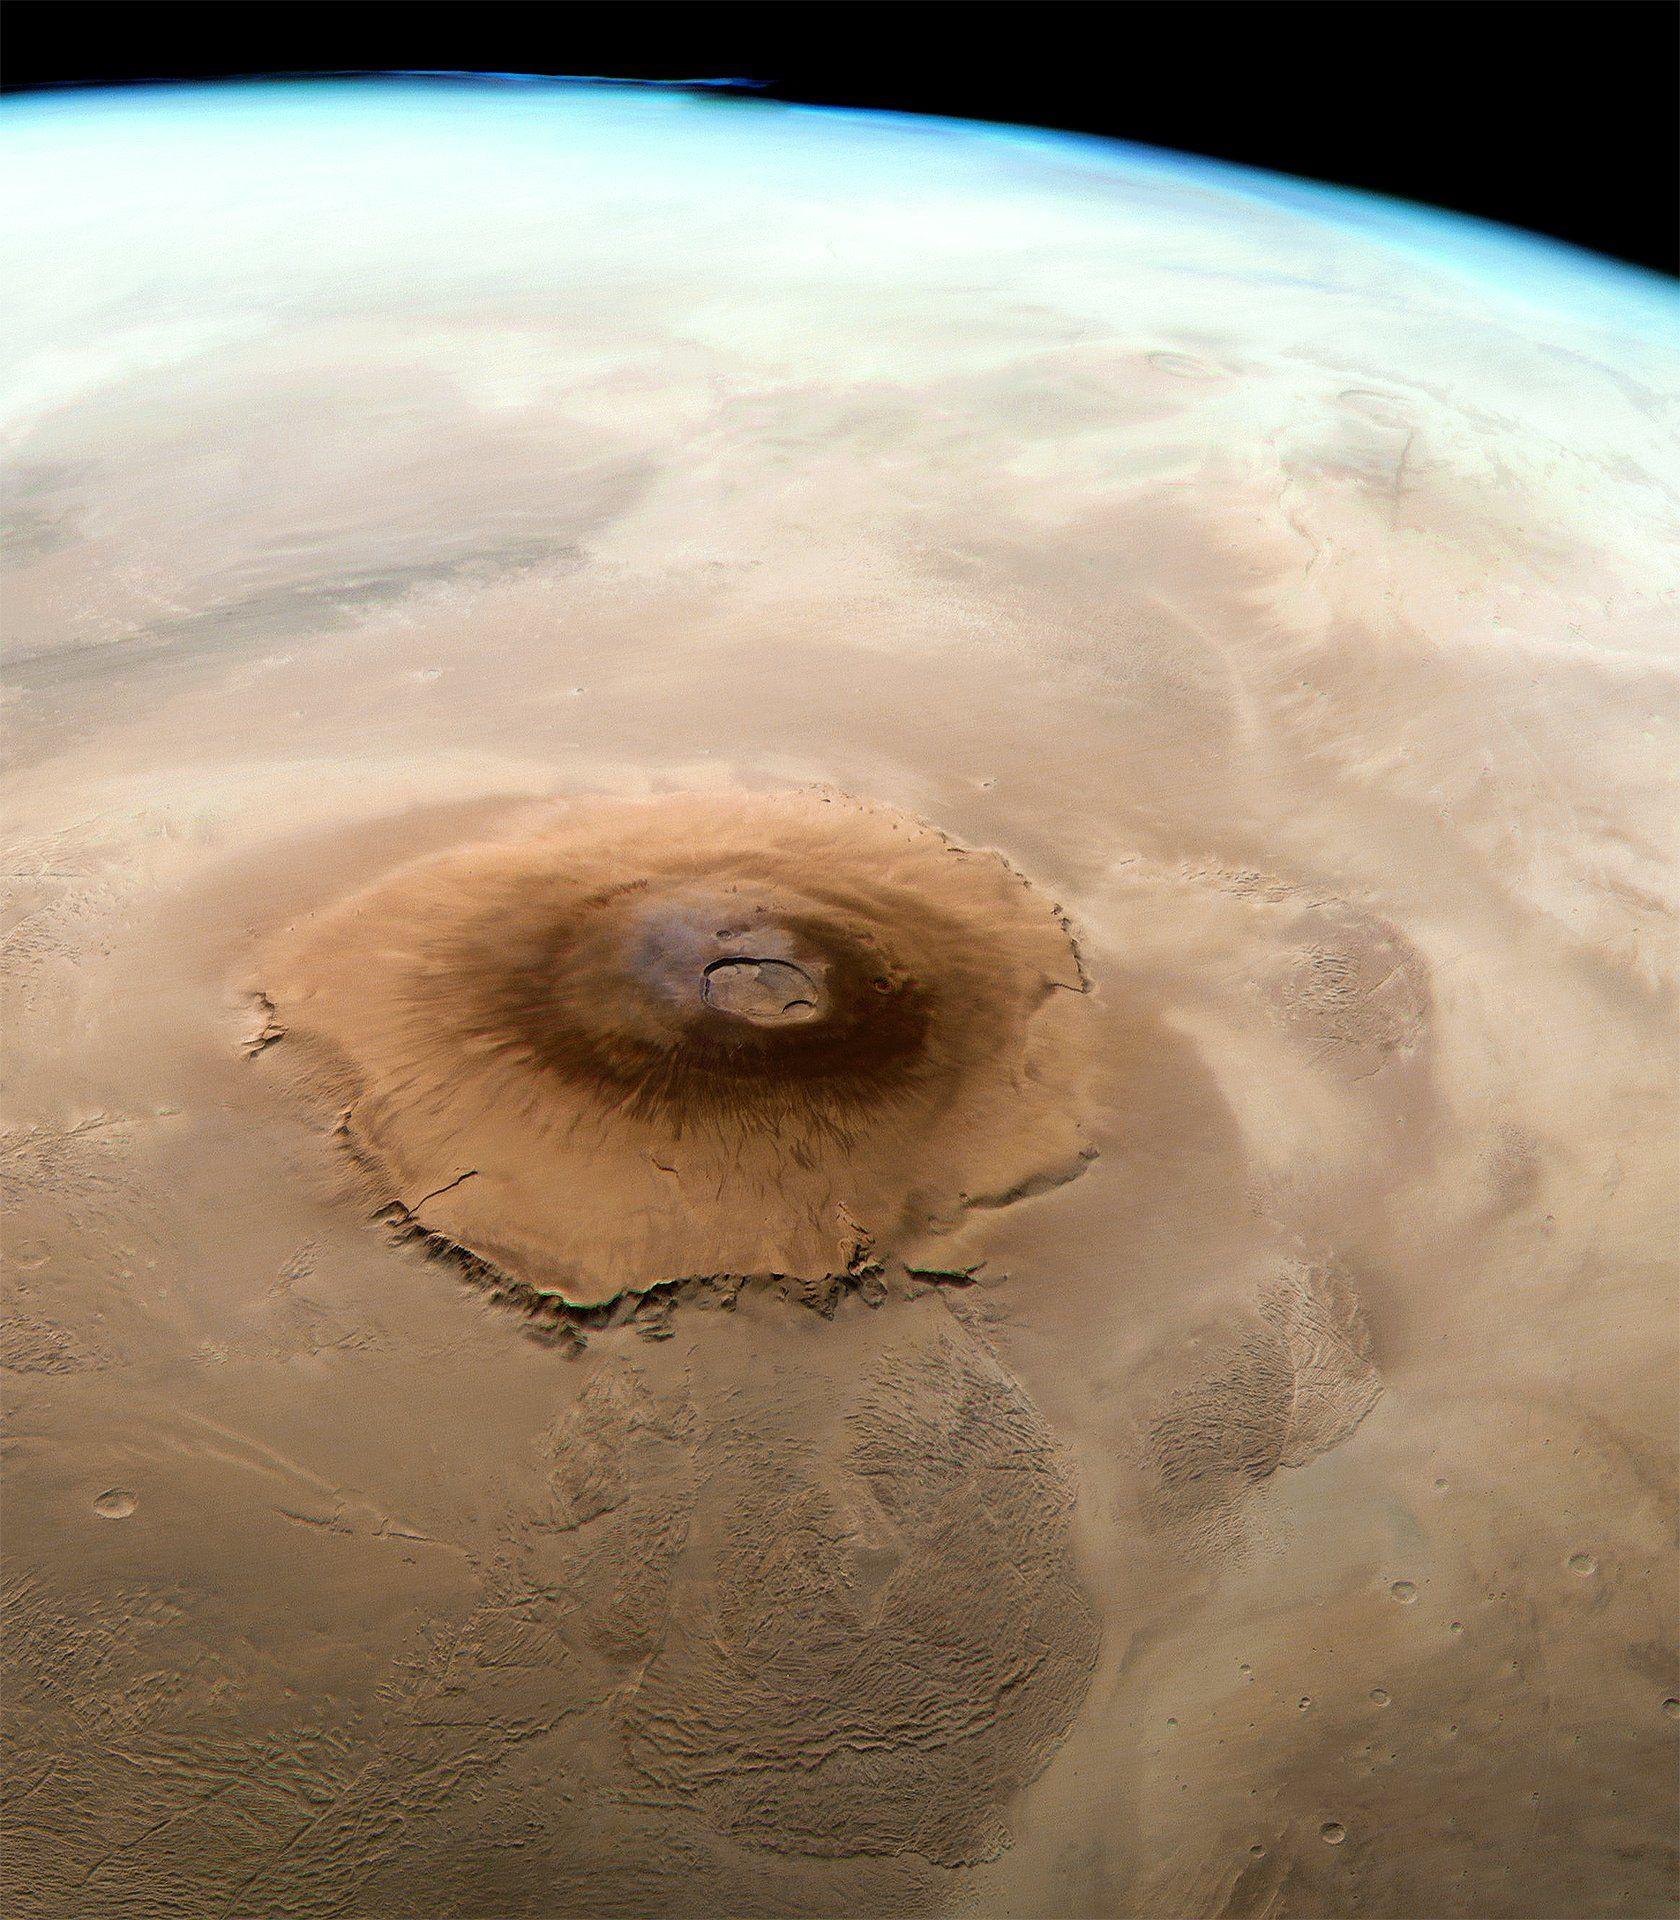 olympus-mons-the-largest-known-volcano-in-the-solar-system-v0-i8p5xulul9rb1.jpg